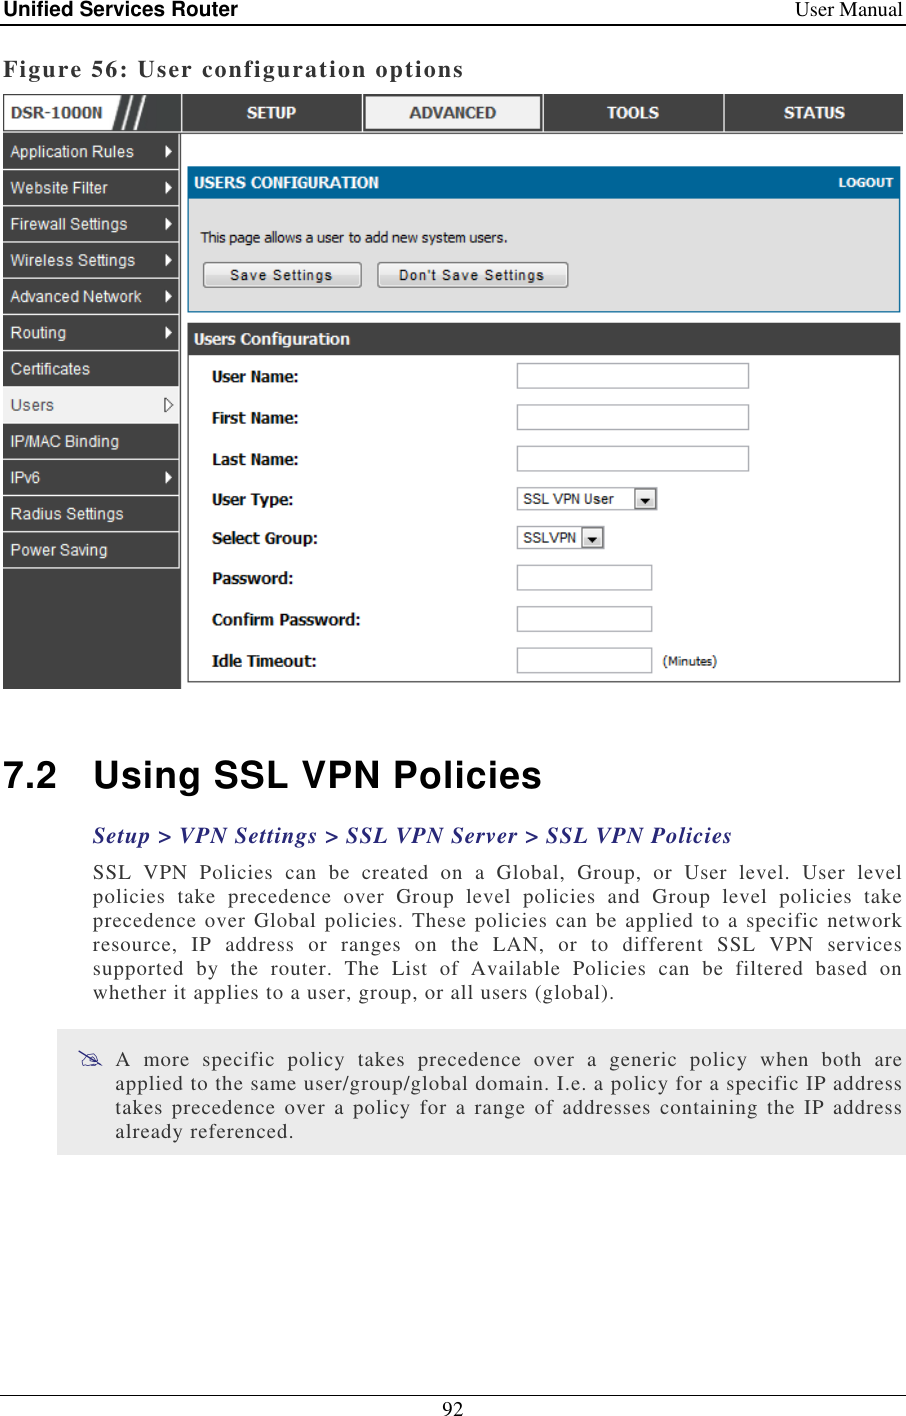 Unified Services Router    User Manual 92  Figure 56: User configuration options   7.2  Using SSL VPN Policies Setup &gt; VPN Settings &gt; SSL VPN Server &gt; SSL VPN Policies  SSL  VPN  Policies  can  be  created  on  a  Global,  Group,  or  User  level.  User  level policies  take  precedence  over  Group  level  policies  and  Group  level  policies  take precedence over Global policies. These policies can be applied to a specific network resource,  IP  address  or  ranges  on  the  LAN,  or  to  different  SSL  VPN  services supported  by  the  router.  The  List  of  Available  Policies  can  be  filtered  based  on whether it applies to a user, group, or all users (global).   A  more  specific  policy  takes  precedence  over  a  generic  policy  when  both  are applied to the same user/group/global domain. I.e. a policy for a specific IP address takes  precedence  over  a  policy  for  a  range  of  addresses  containing  the  IP  address already referenced.  